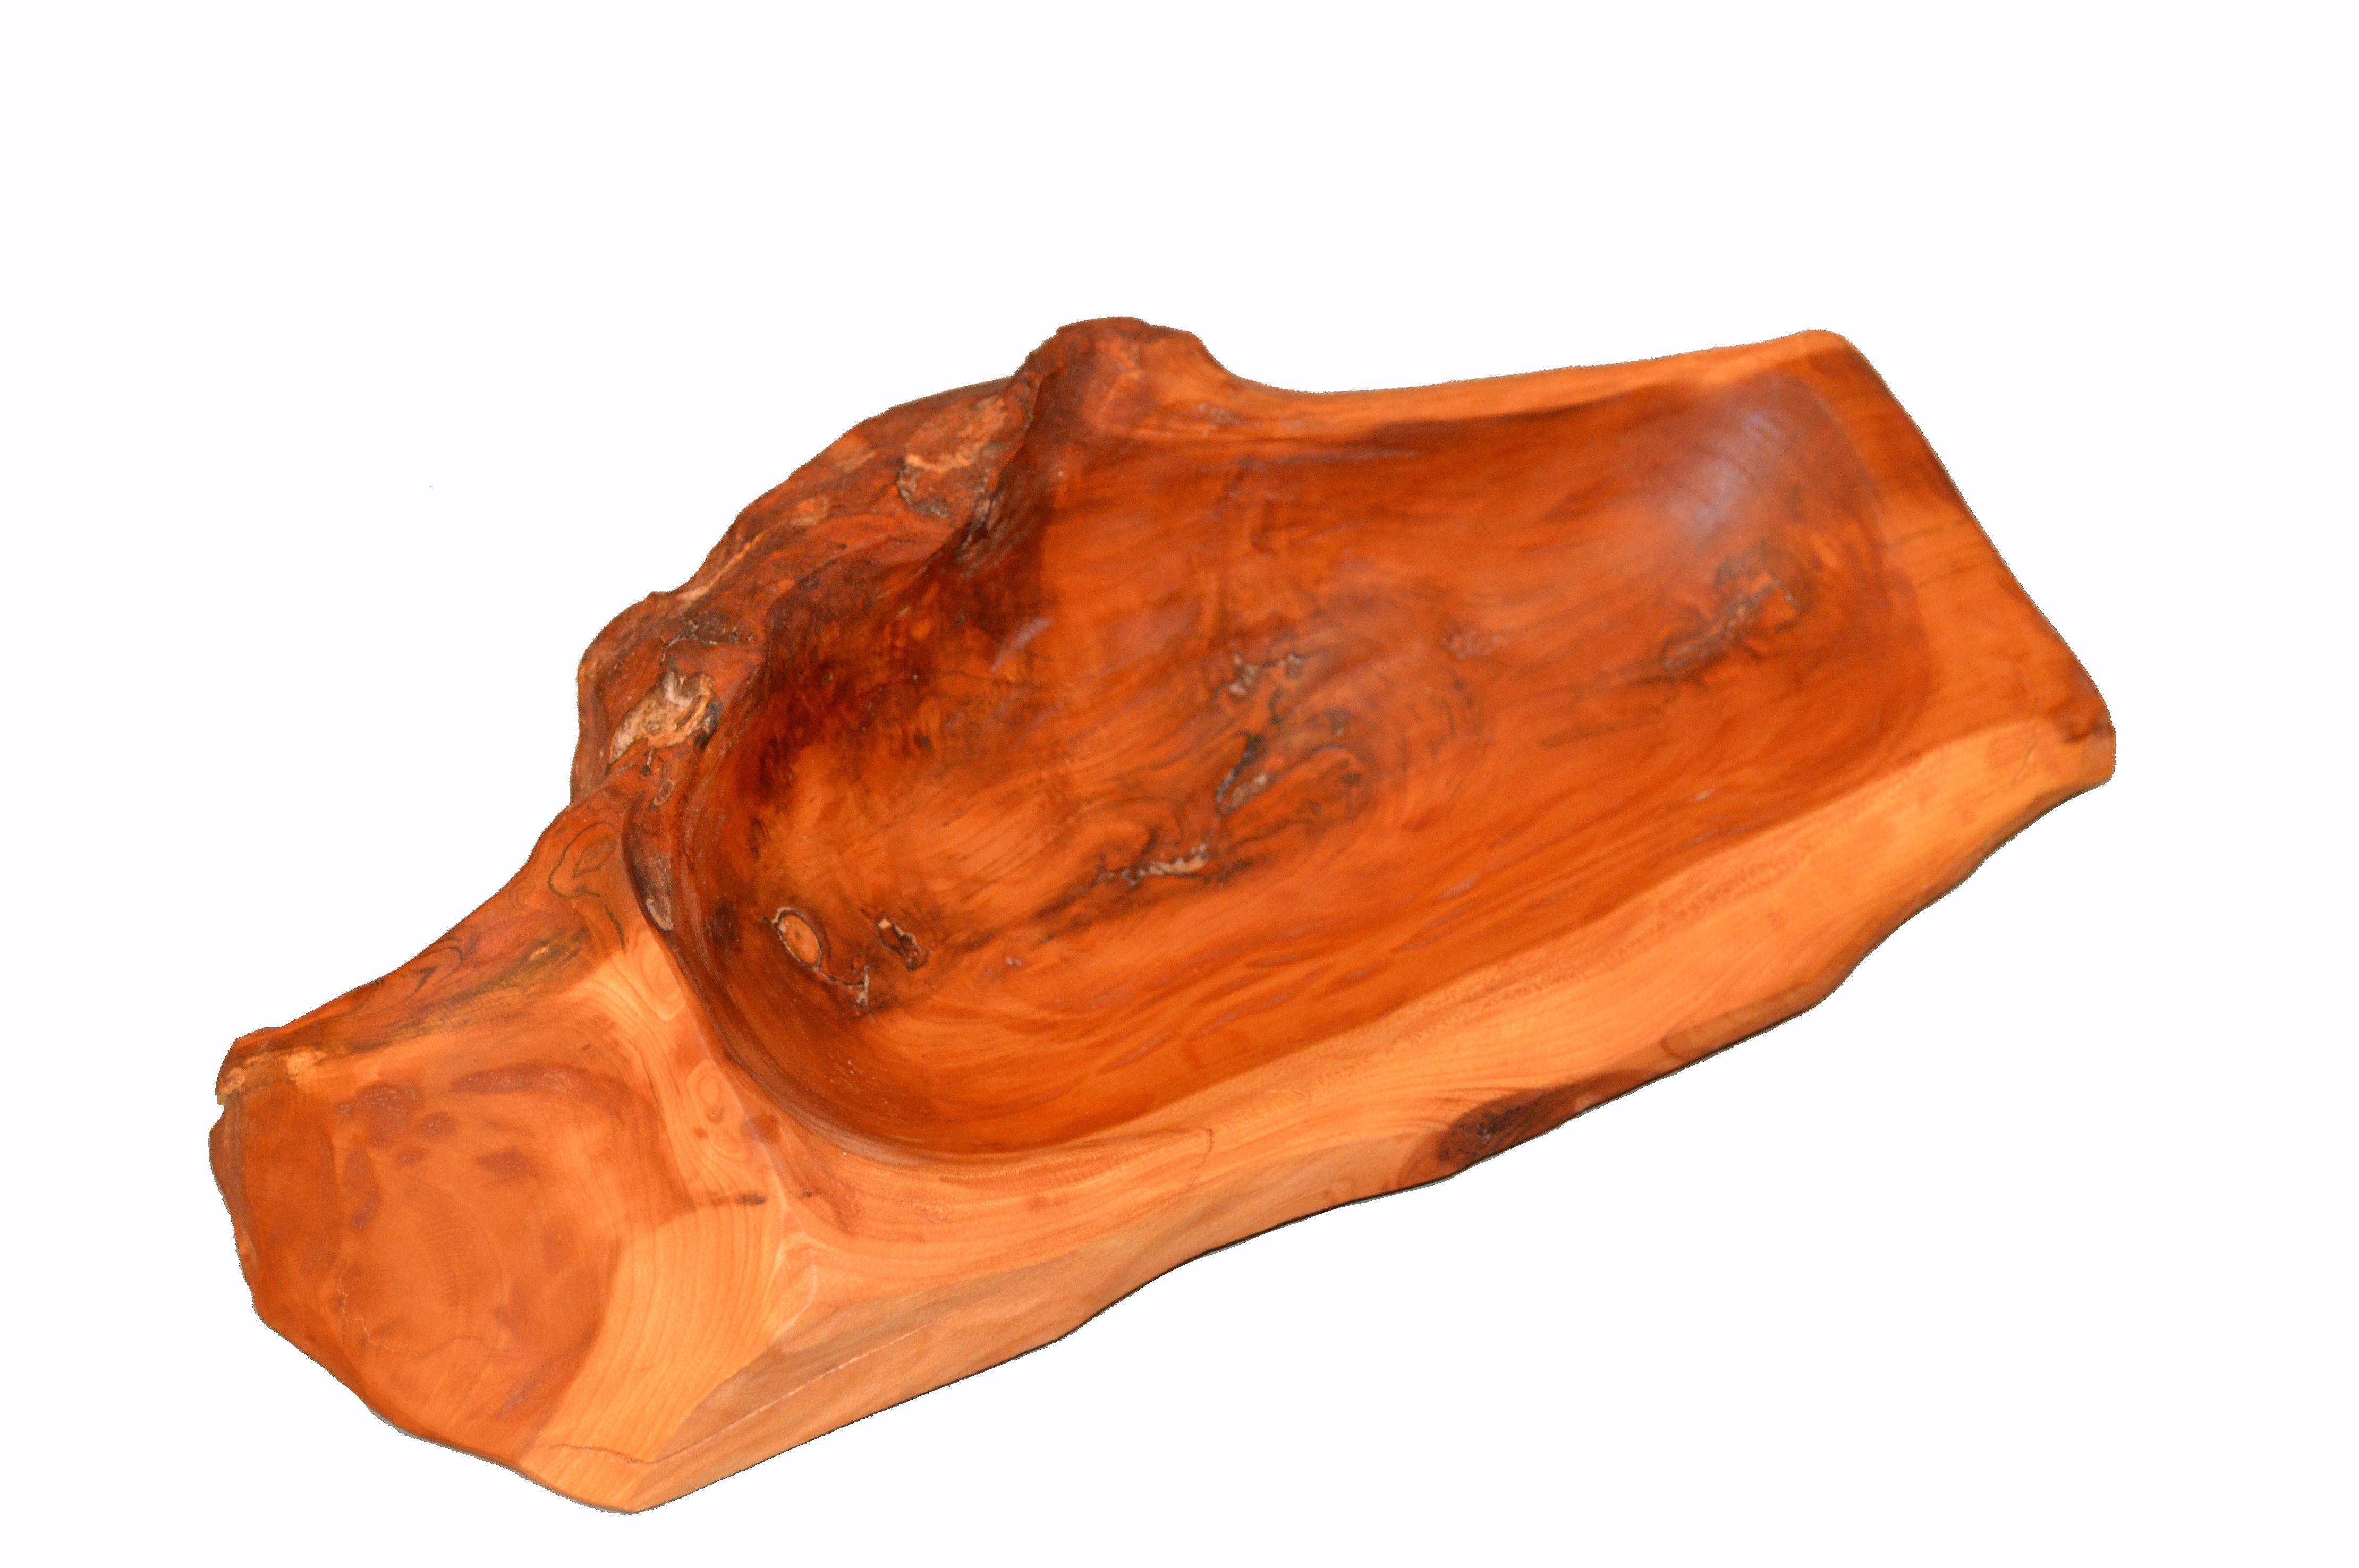 Hand-Crafted American Organic Modern Handcrafted Hardwood Decorative Serving Tray Centerpiece For Sale